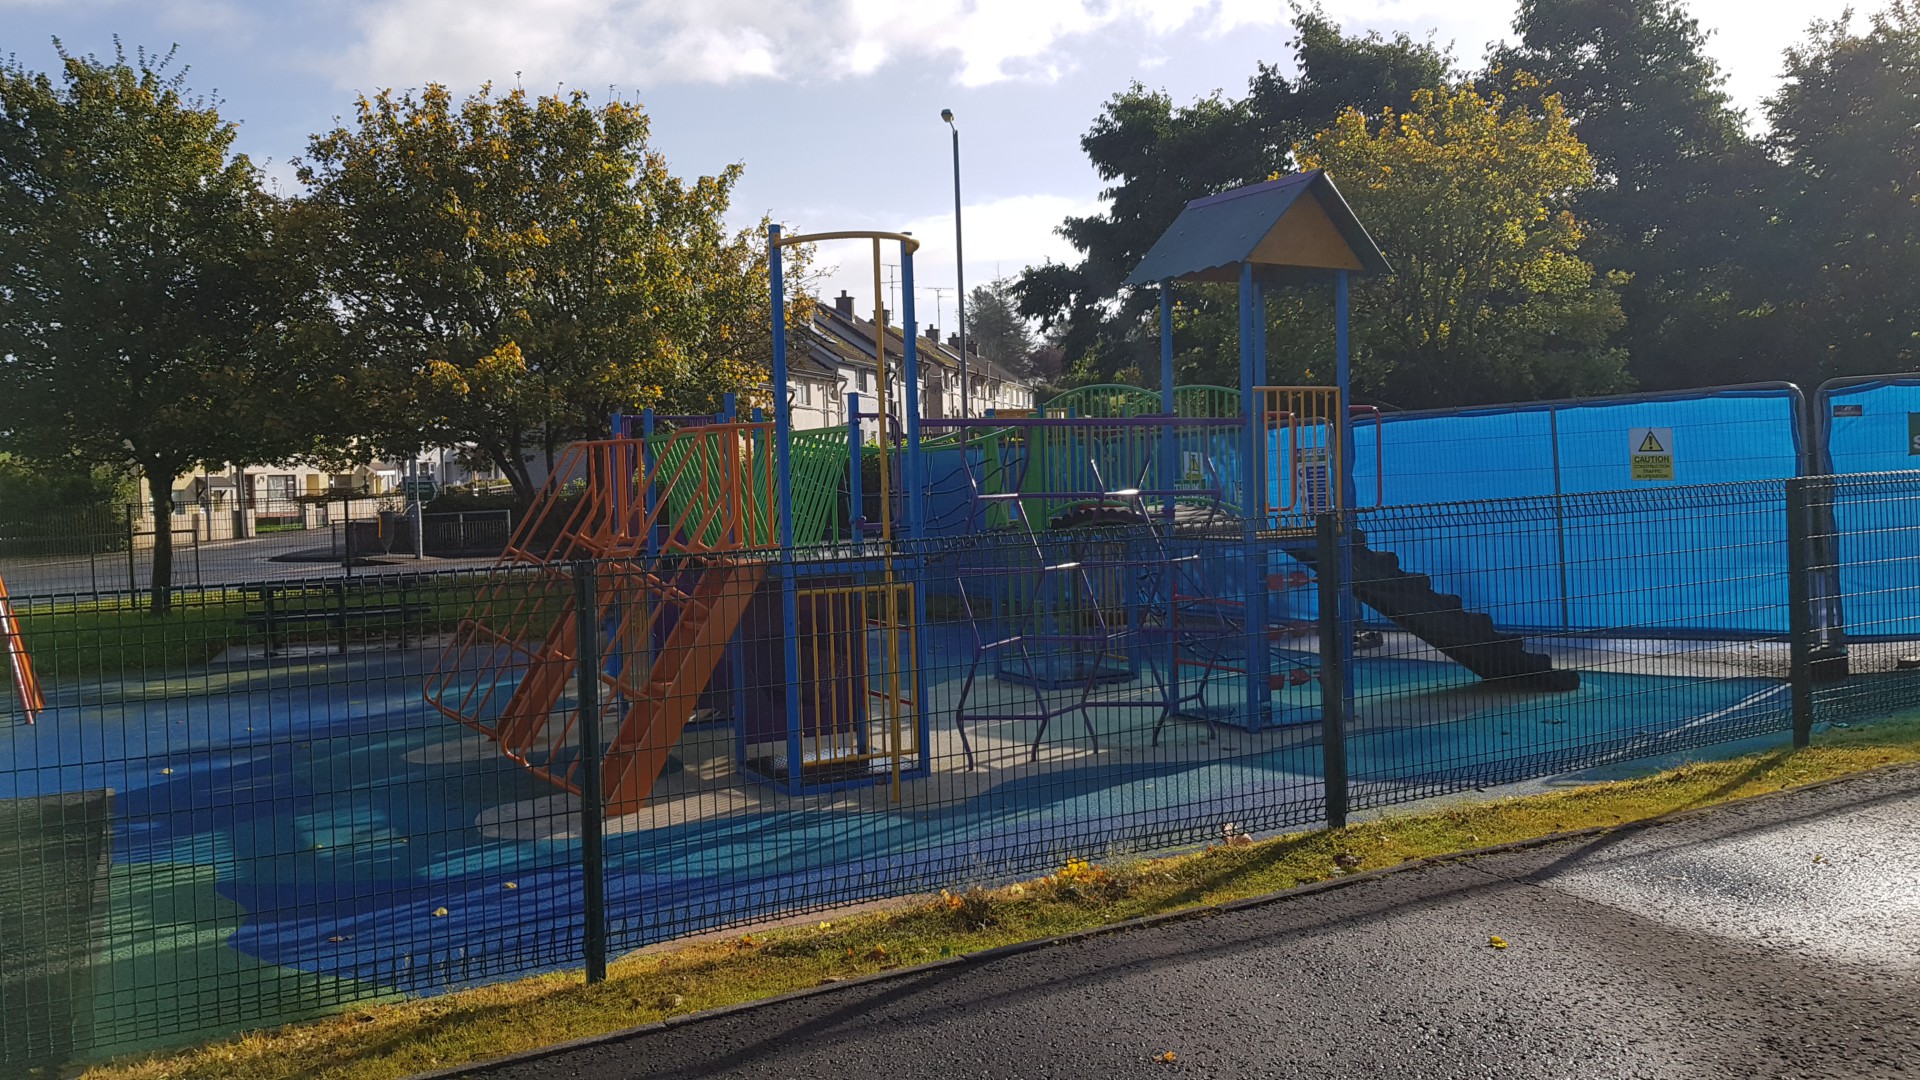 Council seeking views on Dromore play parks